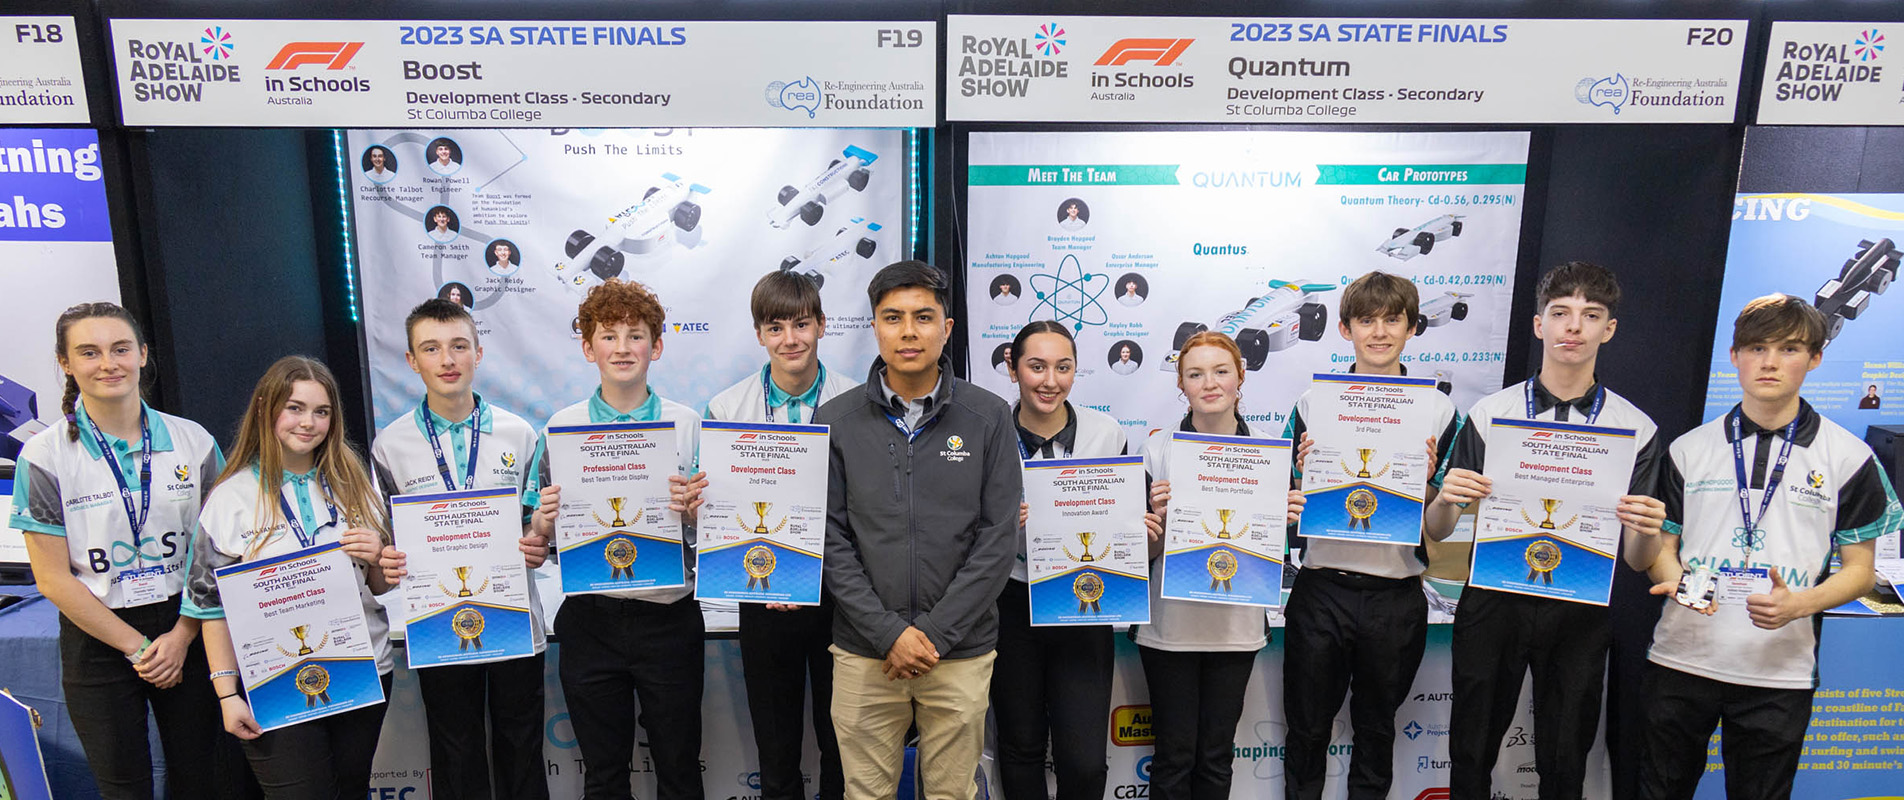 F1 in Schools Team ‘Boost’ their way to National Finals